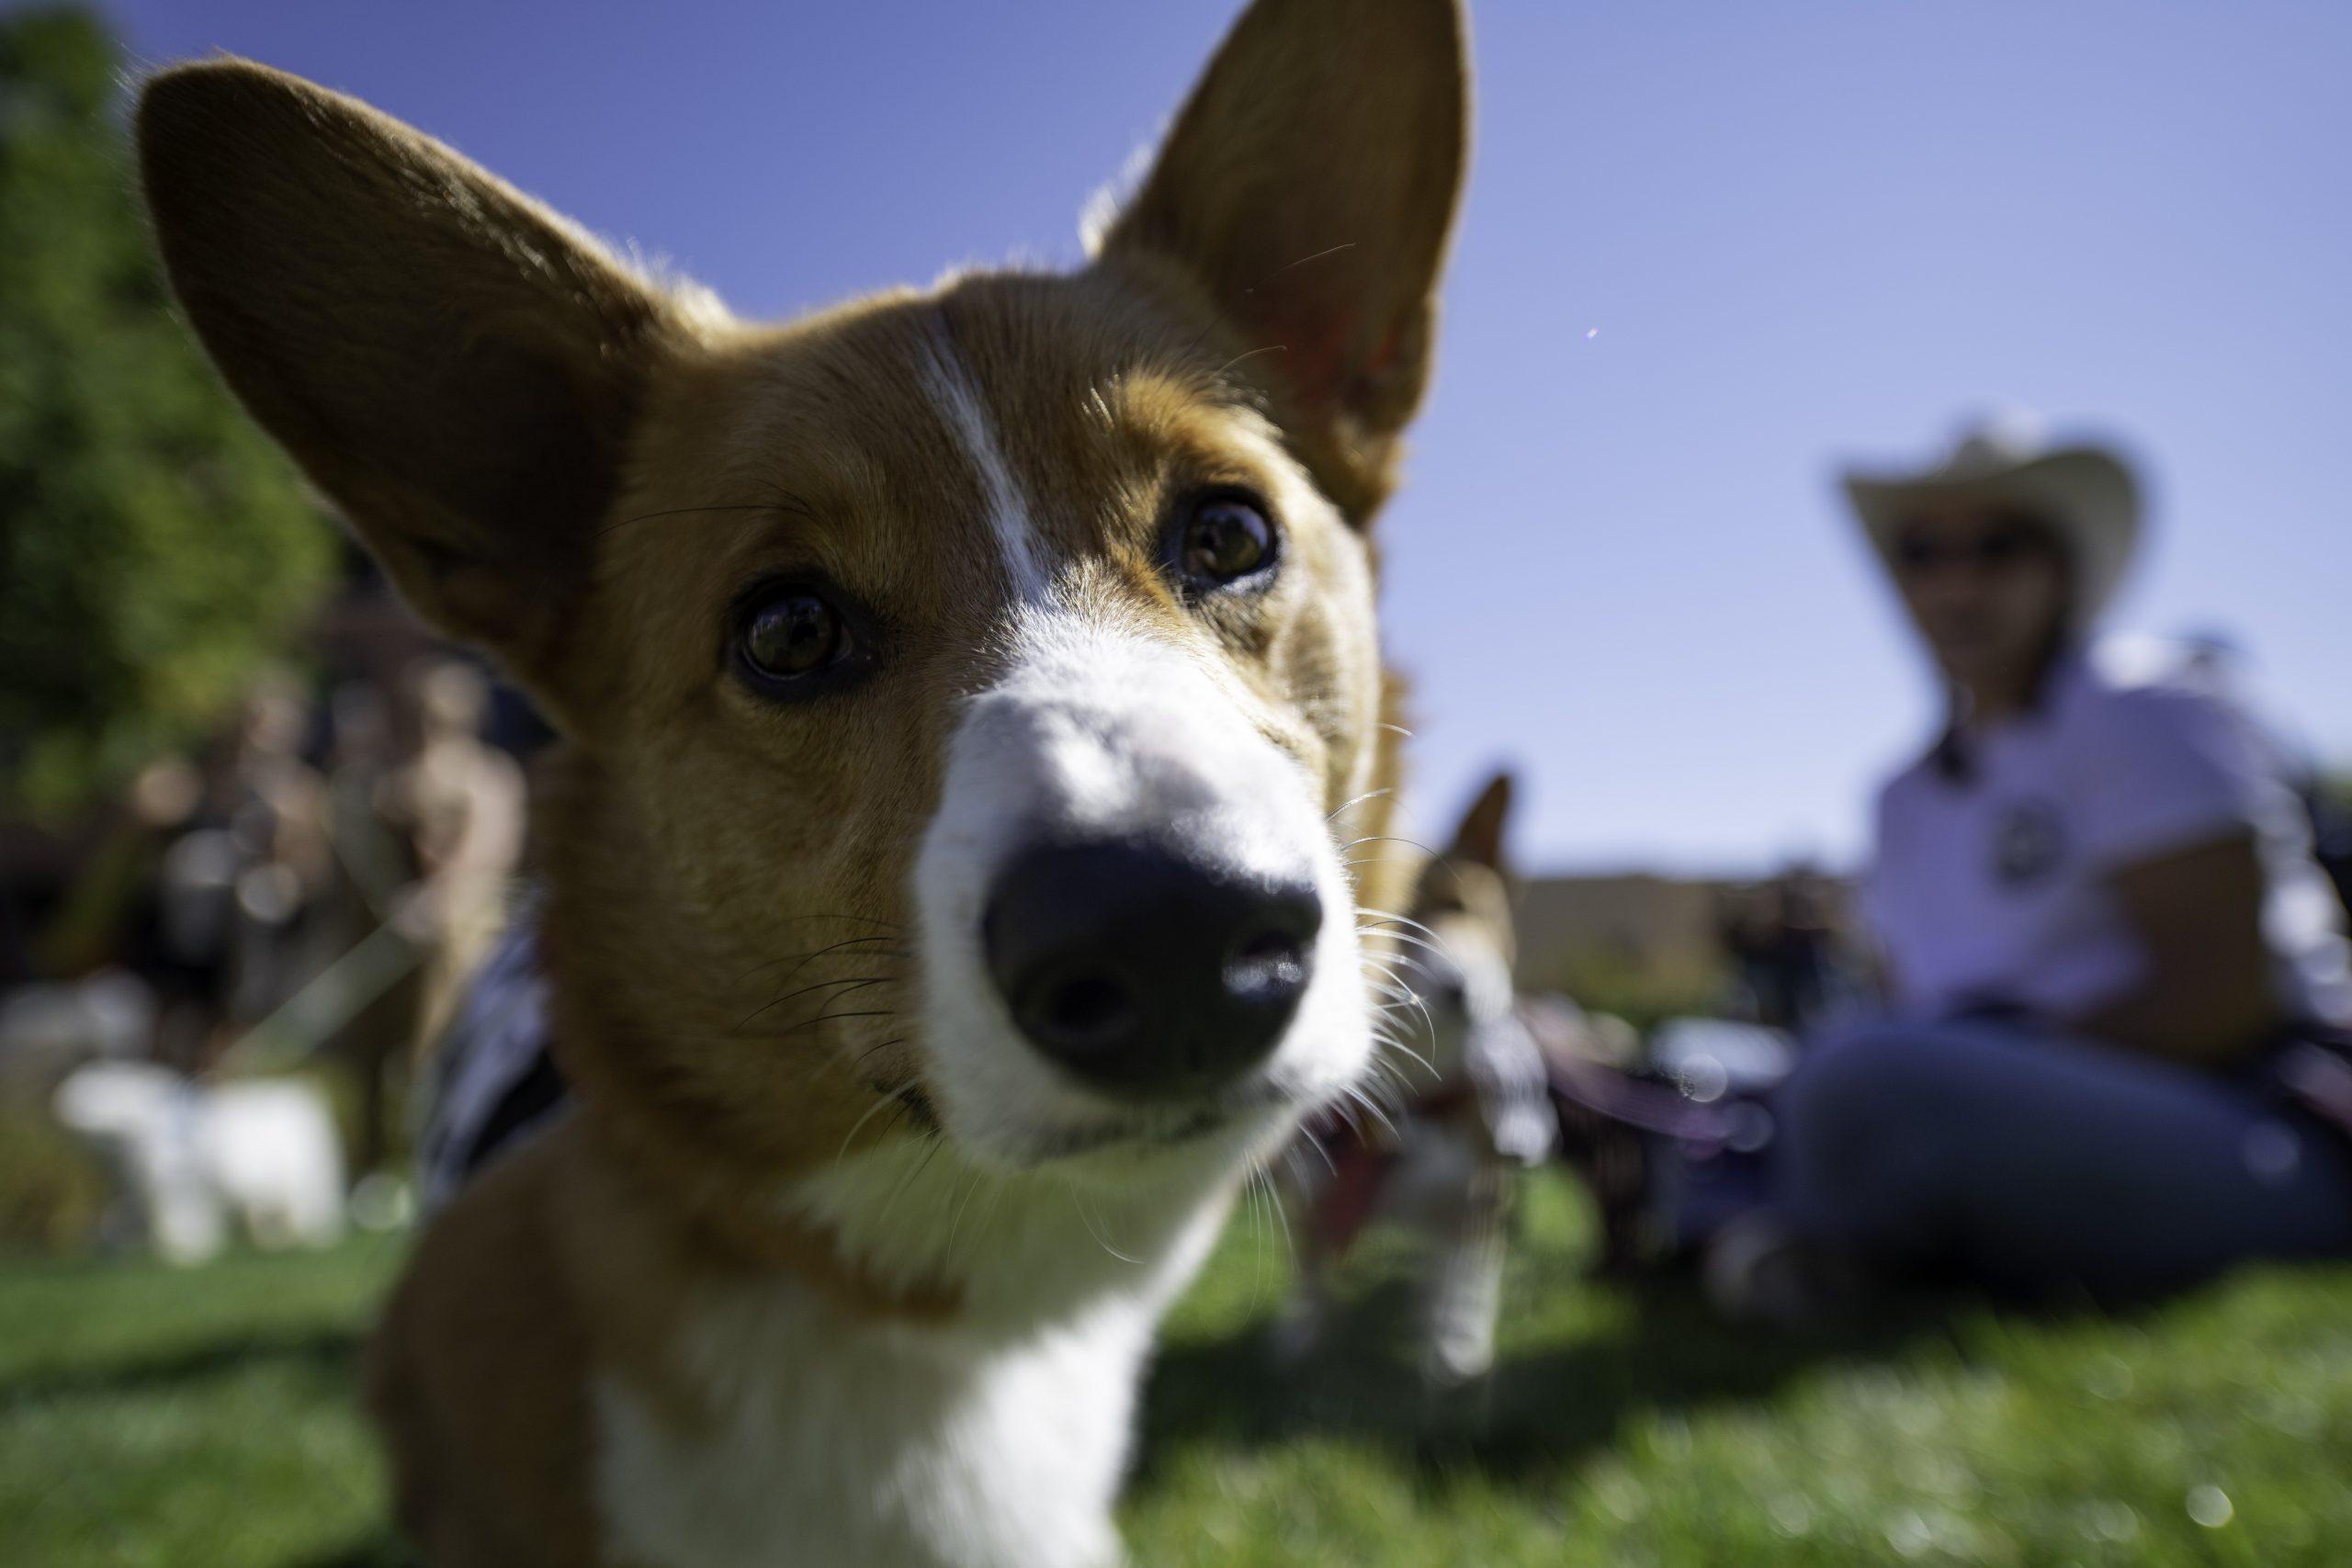 Waffles tilts his head at the sound of the camera shutter while at the Tour De Corgi. Tour De Corgi is an annual gathering of Corgi’s and their owners who paraded around Old Town Fort Collins Colorado Oct. 2. (Garrett Mogel | The Collegian)